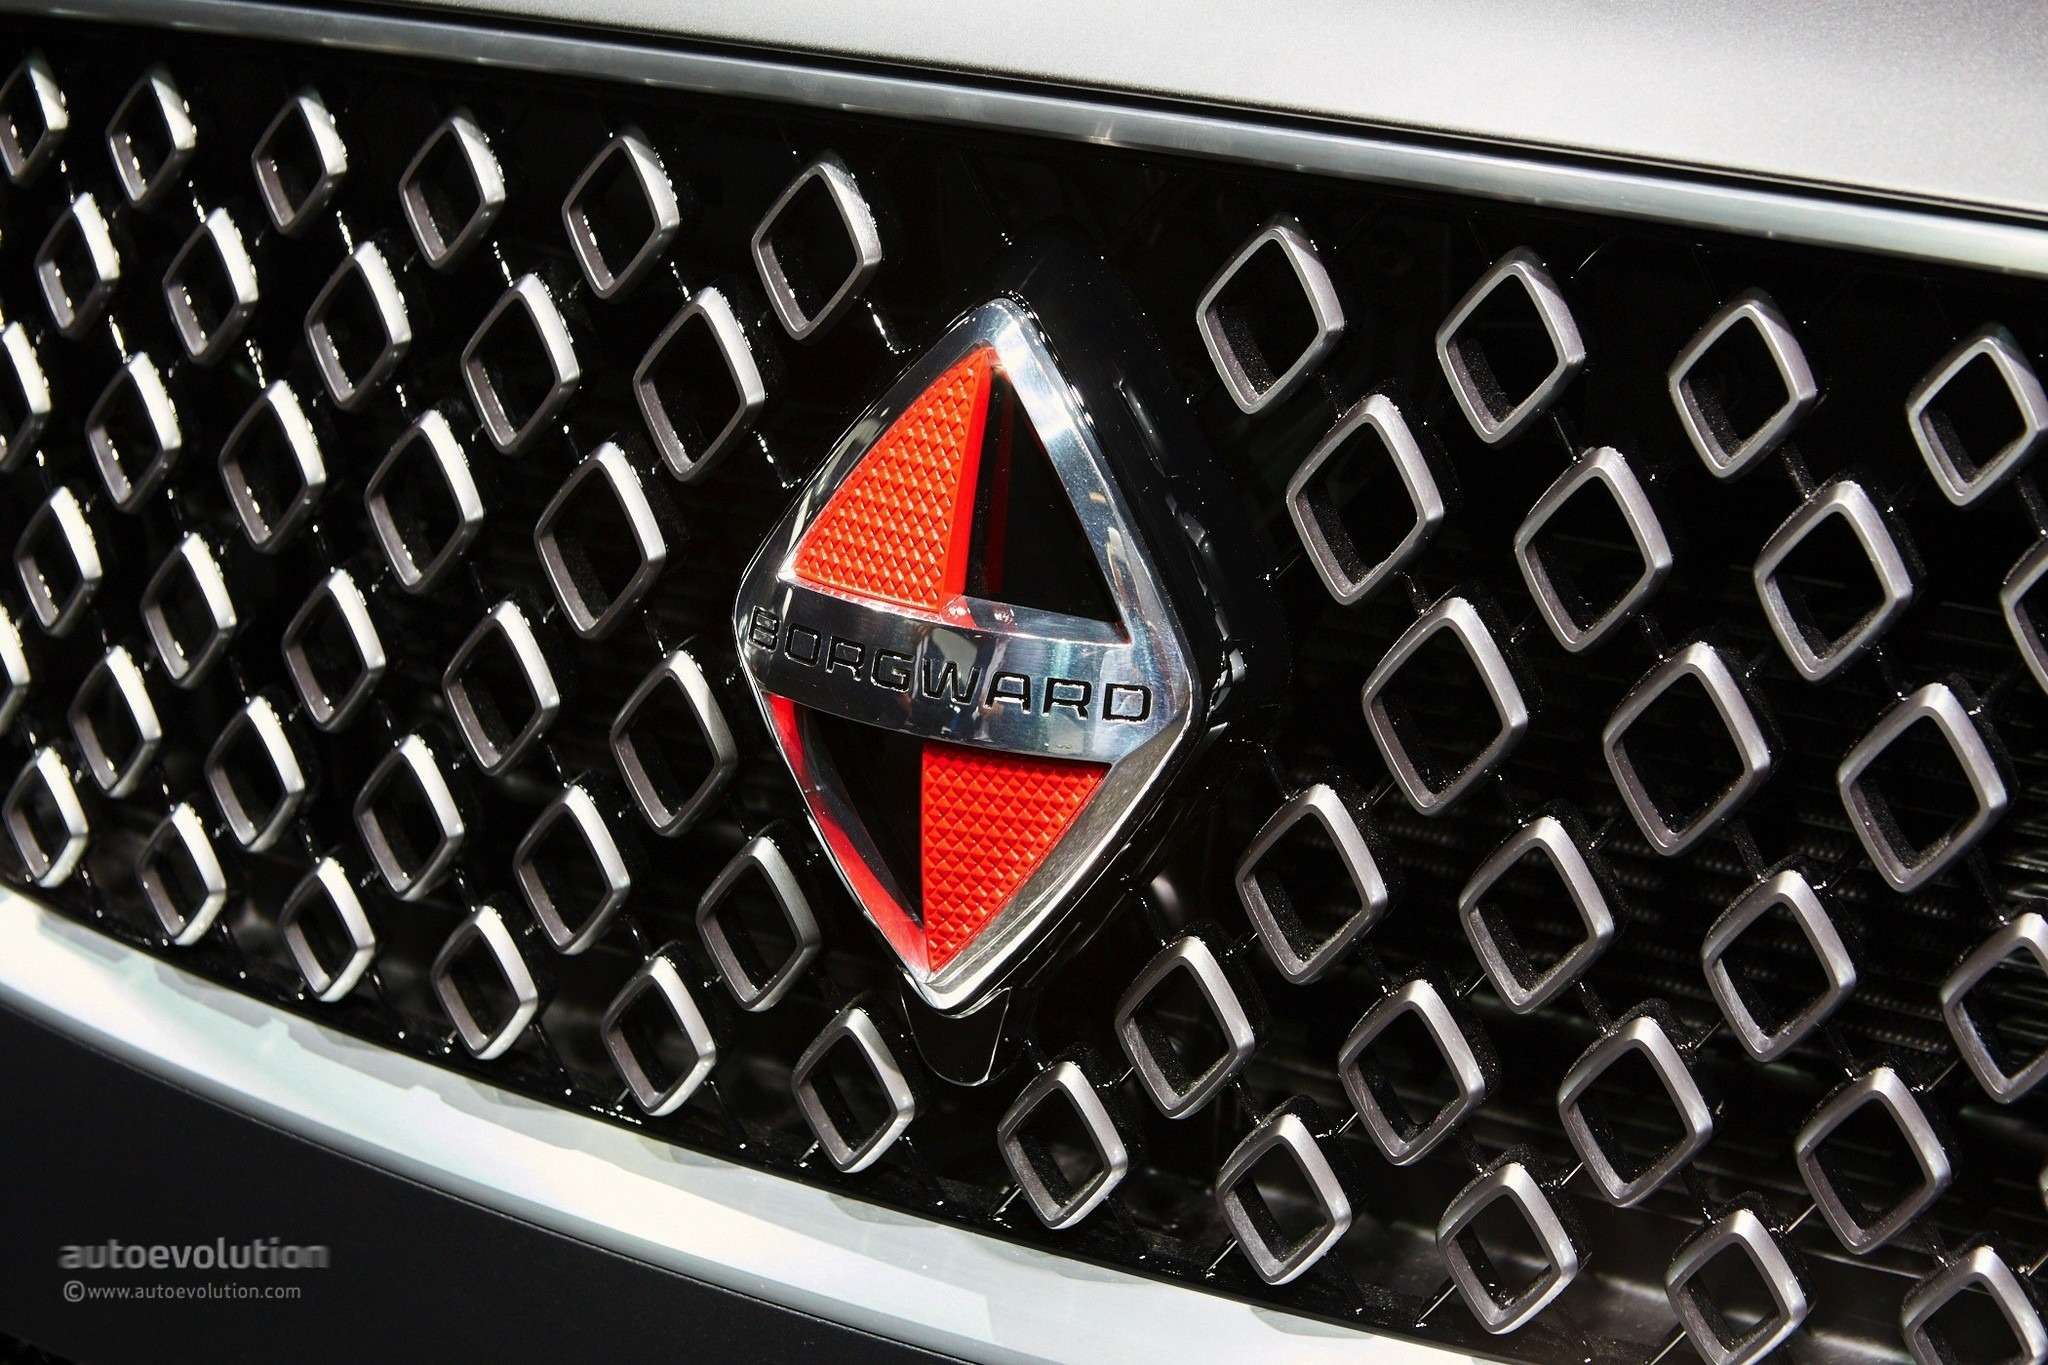 borgward-is-officially-back-with-its-bx7-suv-in-frankfurt-live-photos_1